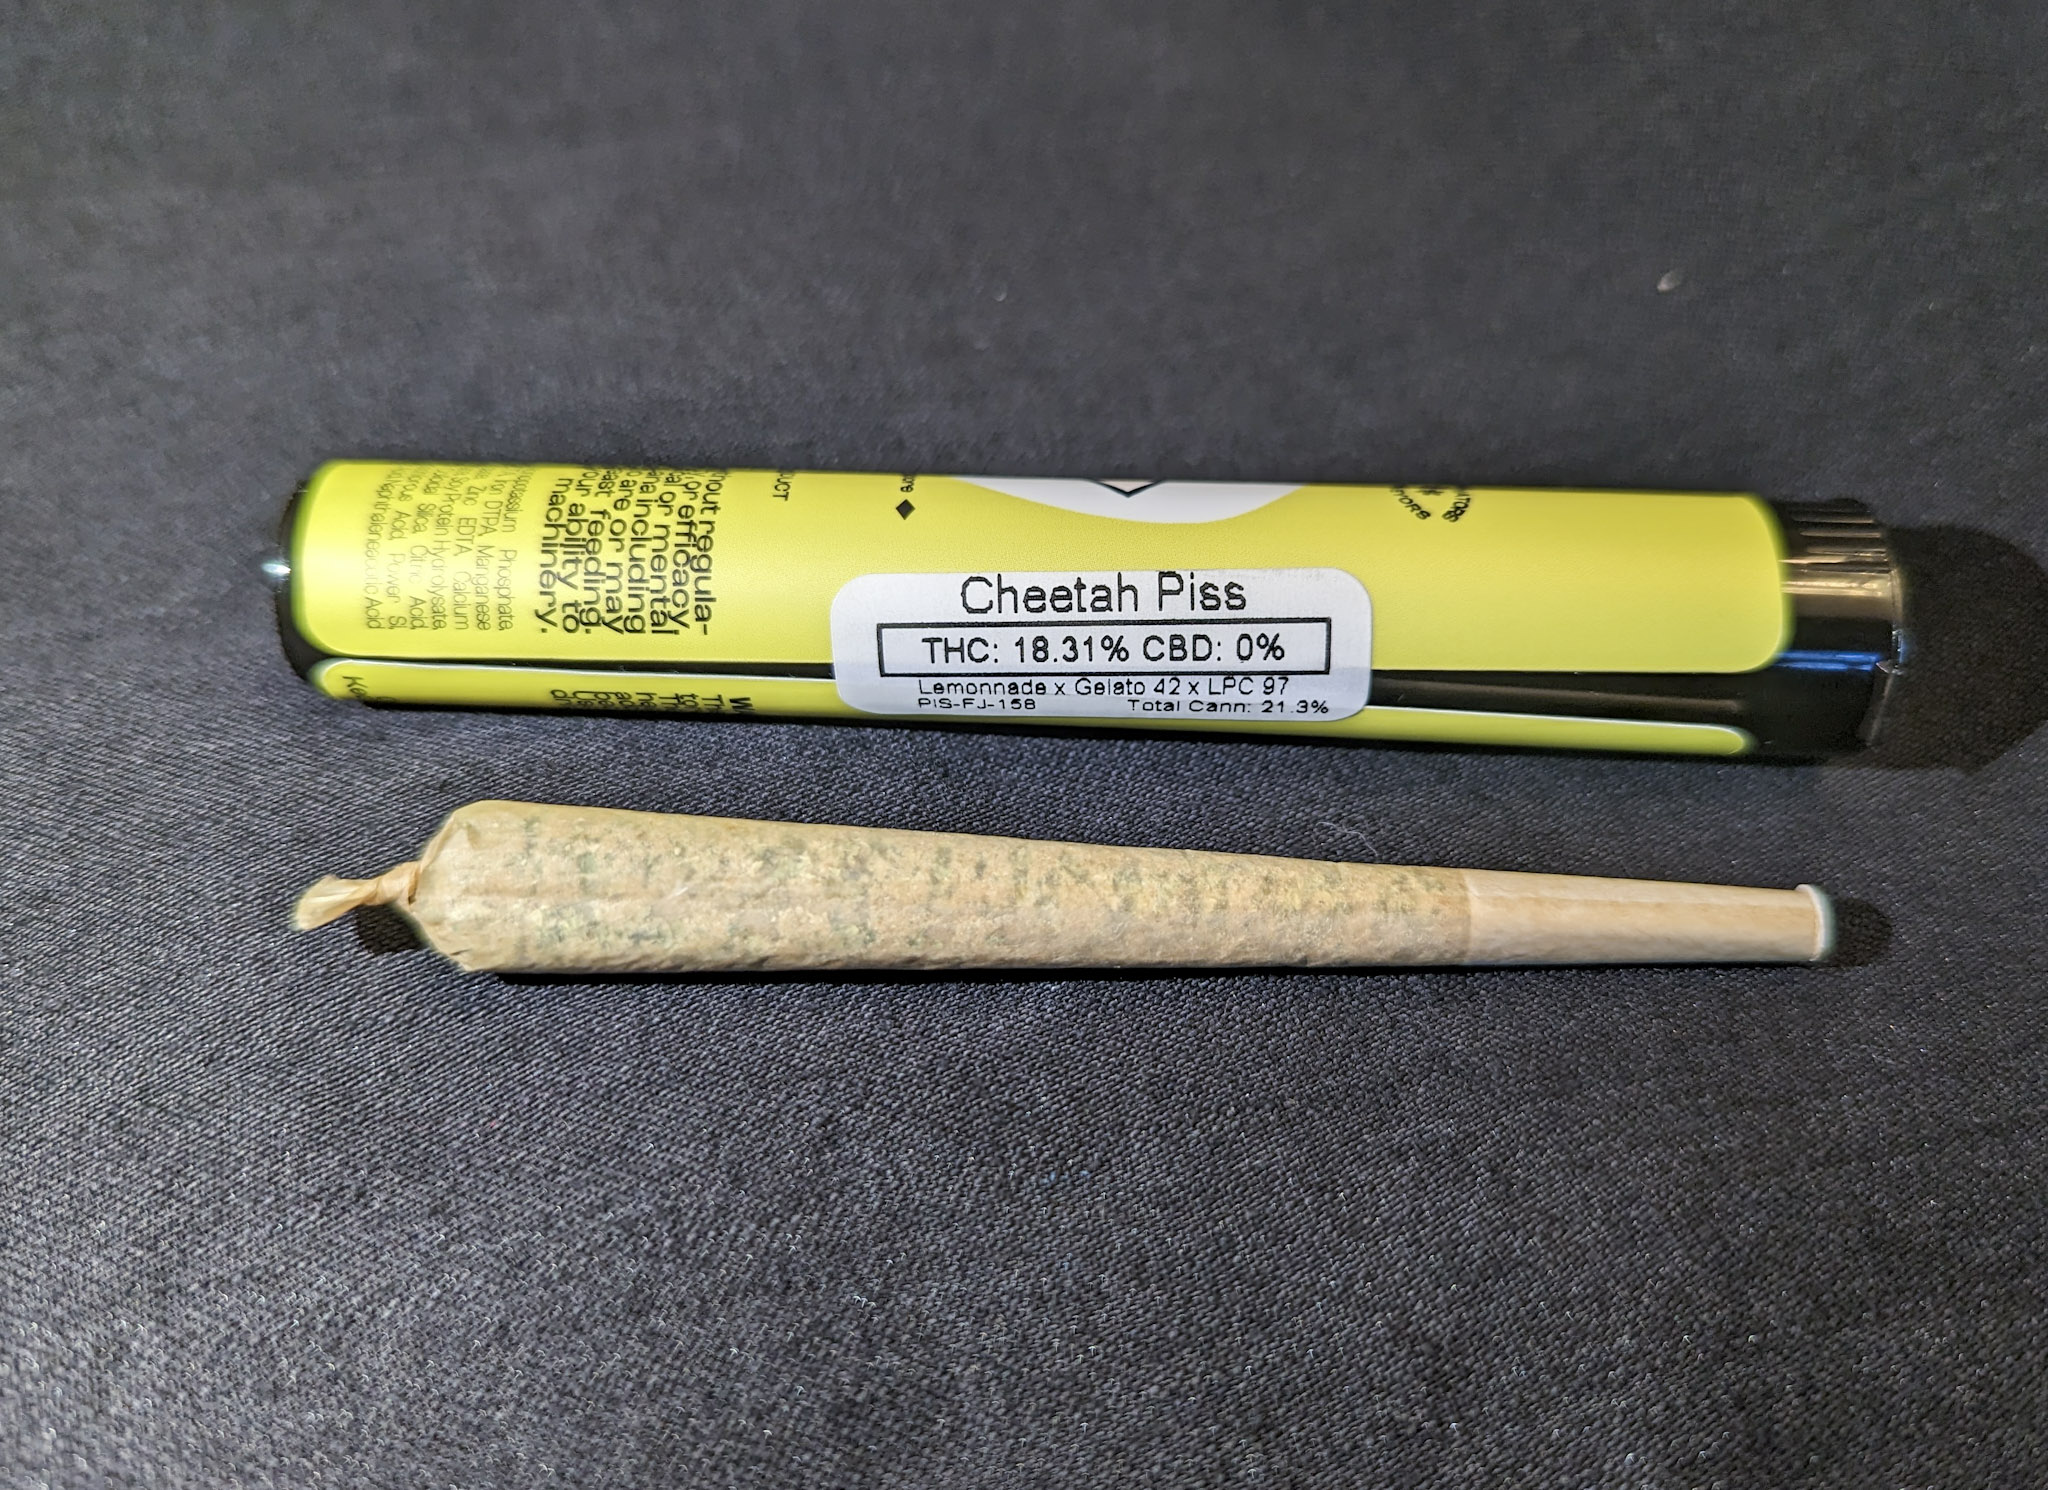 A picture of a joint tube and a joint of Cheetah Piss Strain from High Country Healing in Colorado.